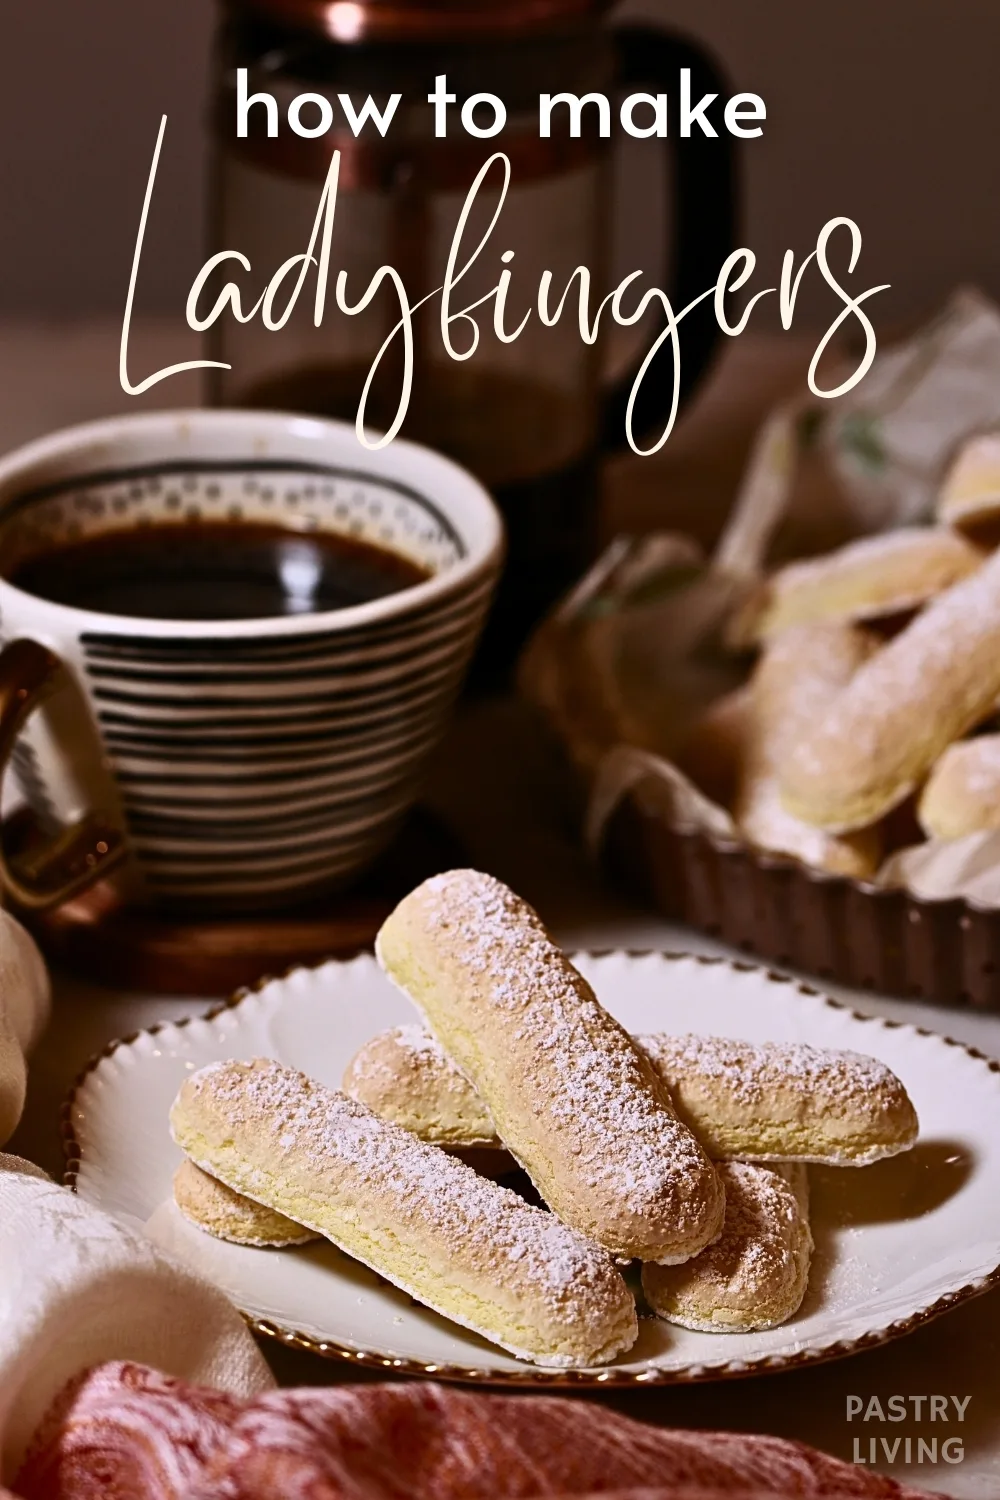 homemade ladyfingers on a plate and coffee set